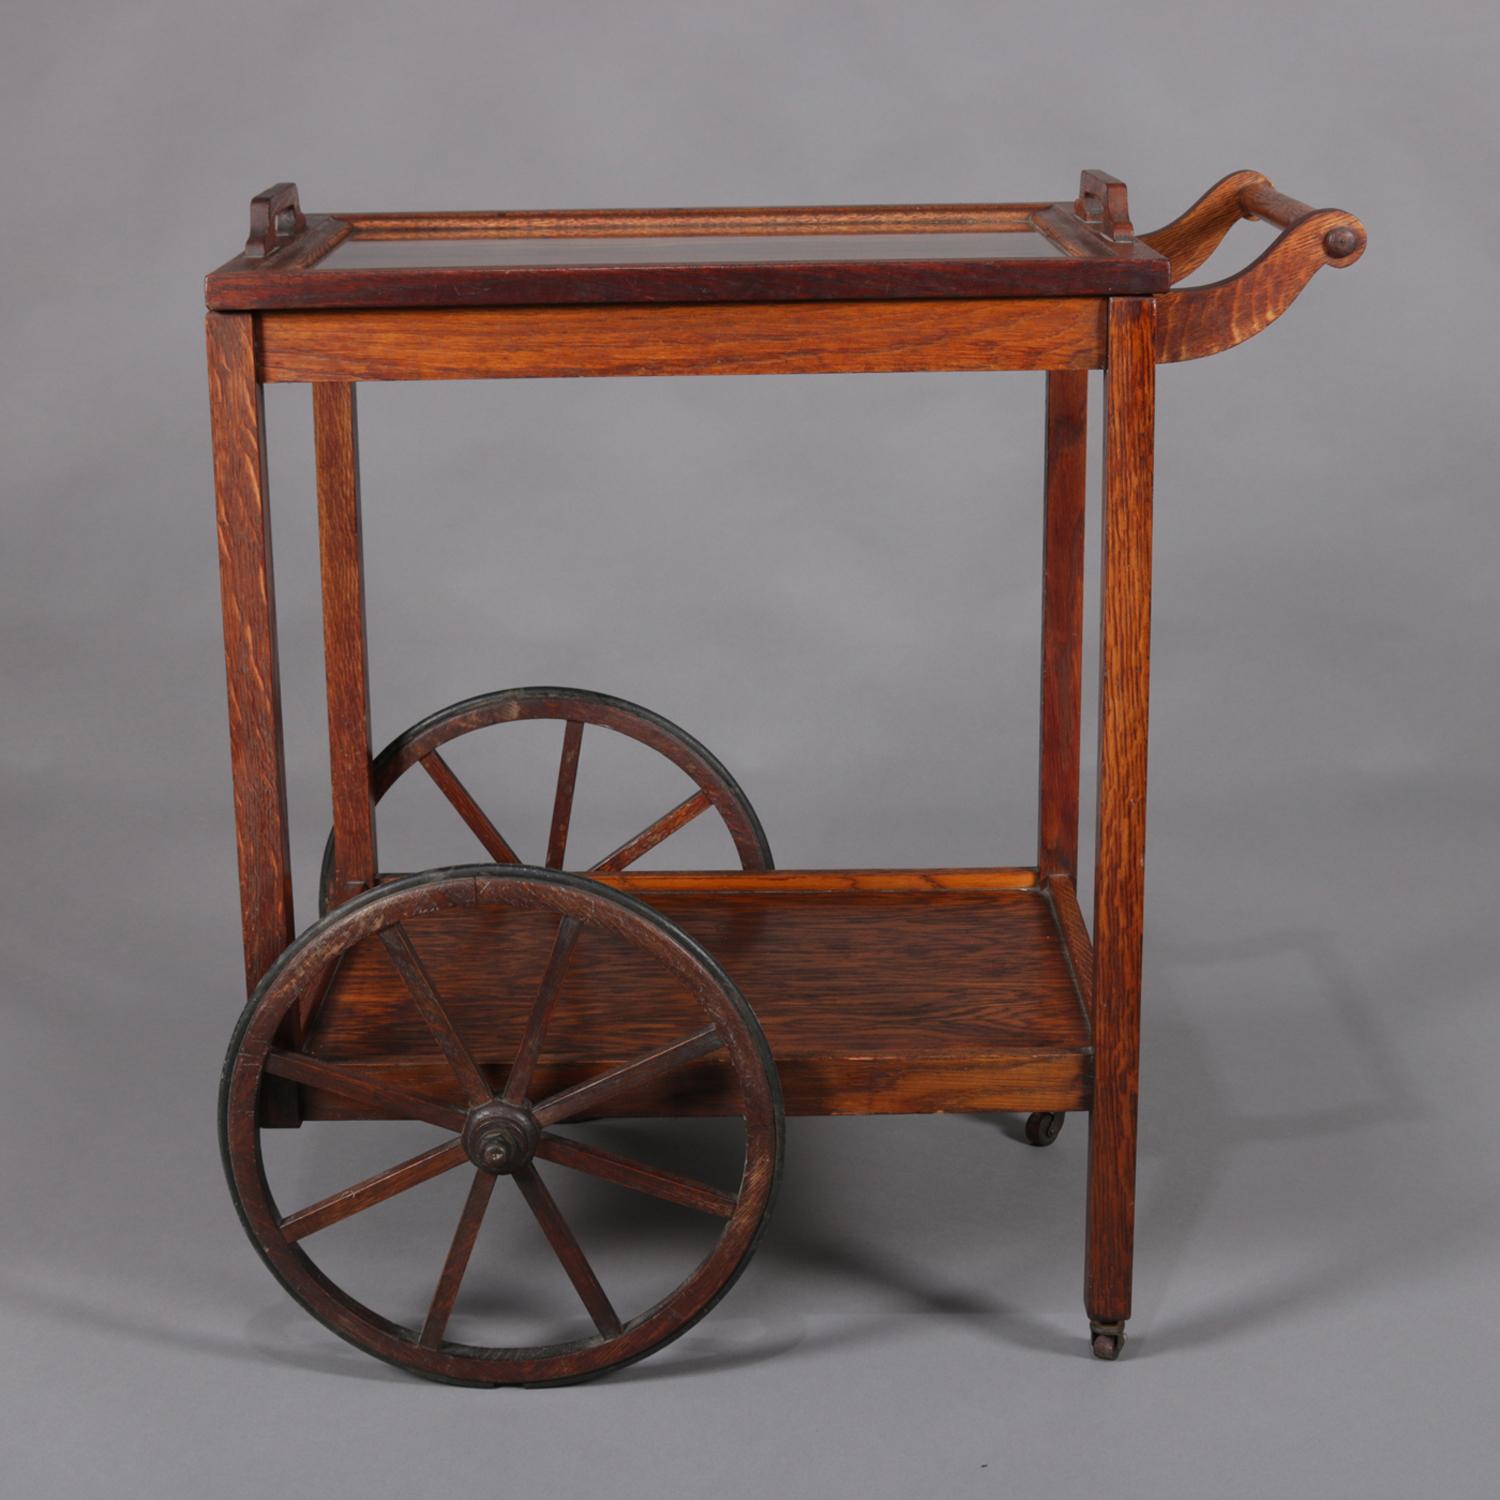 Antique Arts & Crafts Stickley Brothers tea cart features Mission Oak construction and design with upper and lower tray, scrolled handle, oversized and spoked wheels, 